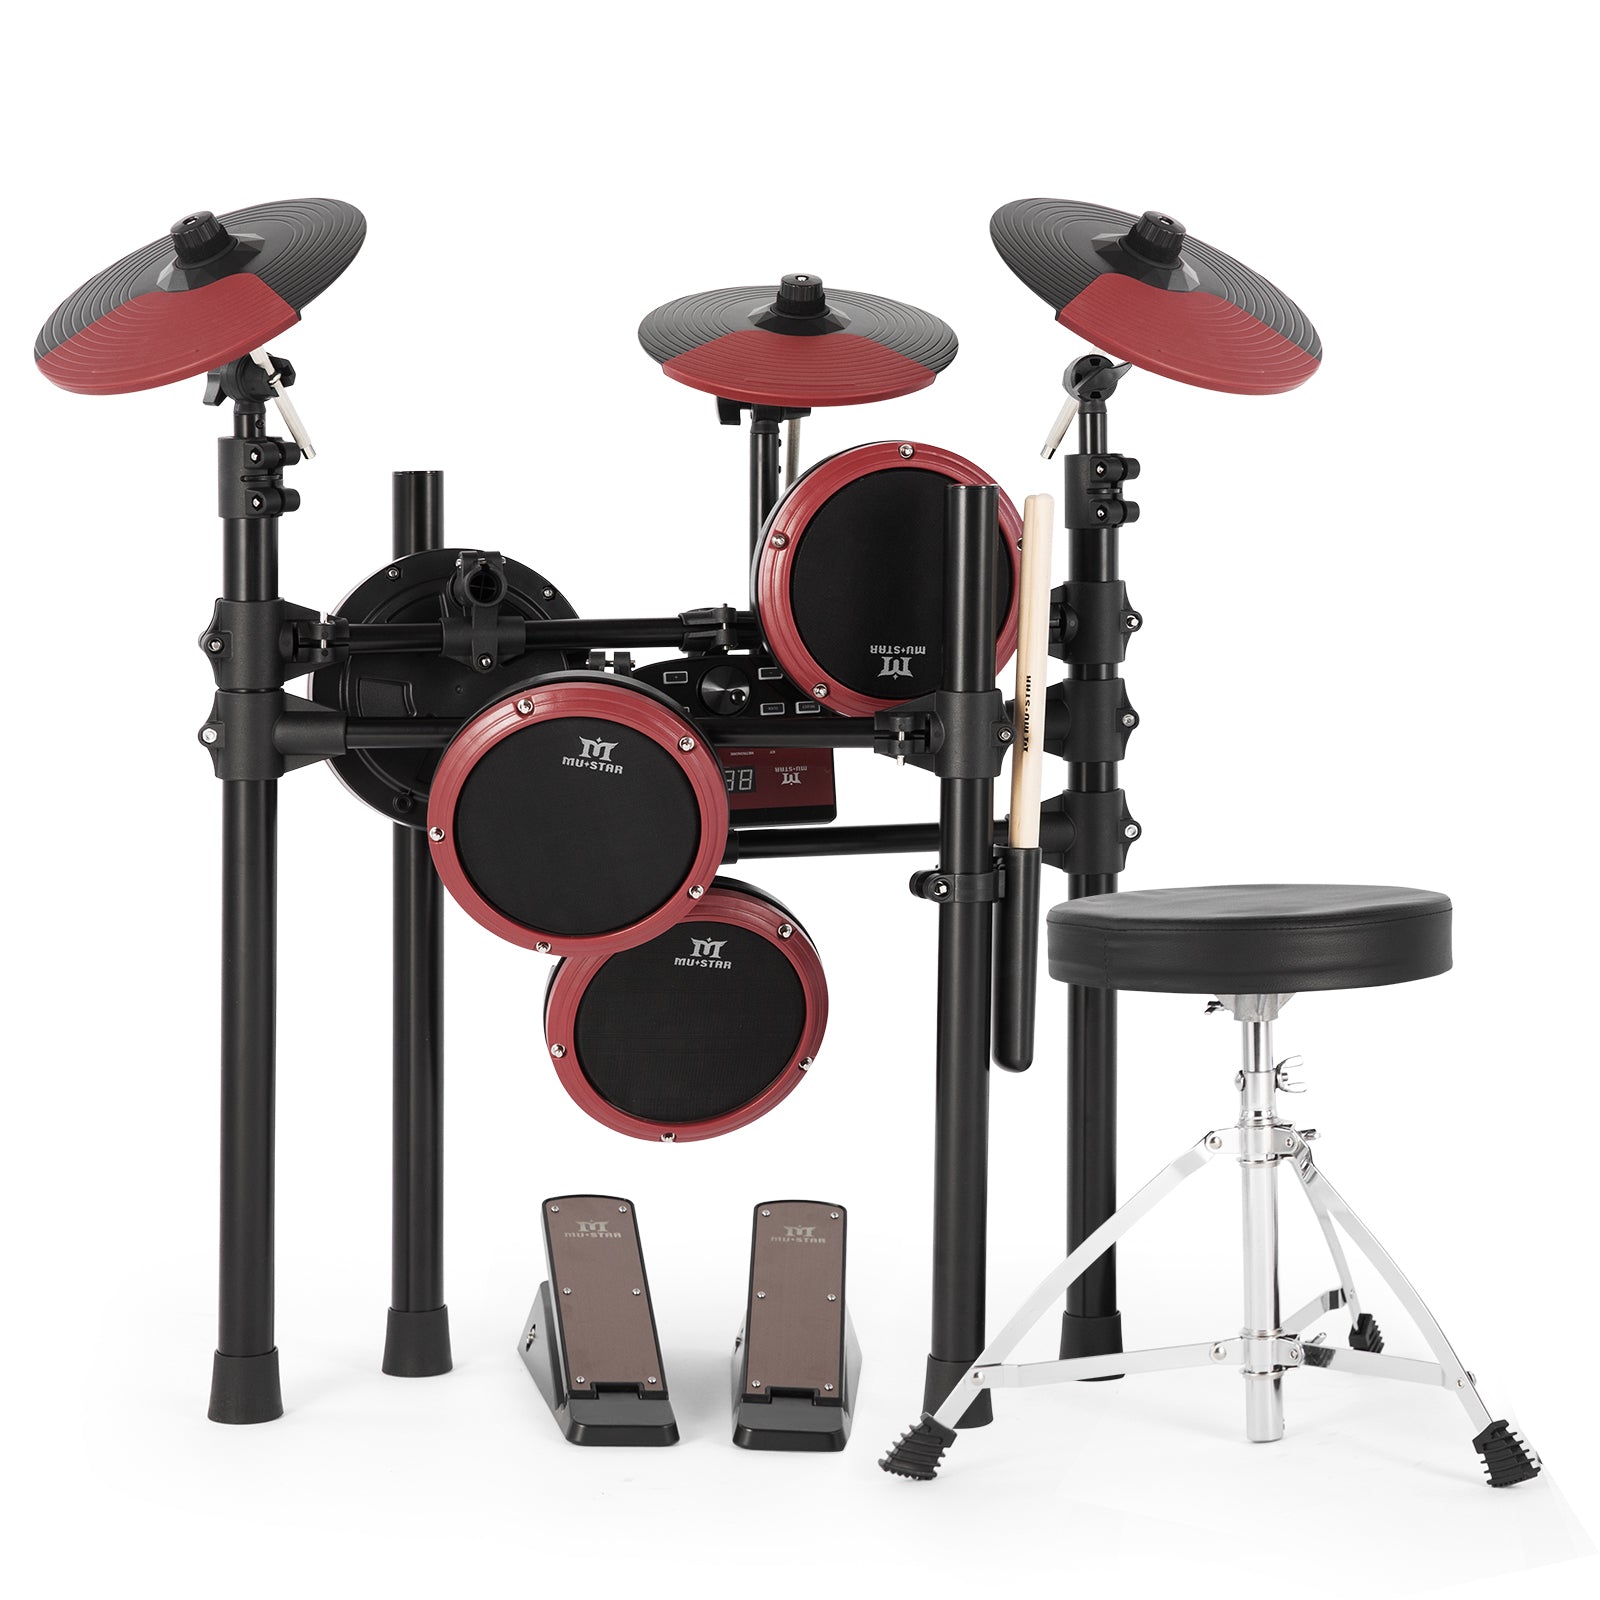 MUSTAR MED-200, Electronic Drum Set, 180 Sounds, 15 Kits, For Kids, Birthday Gift